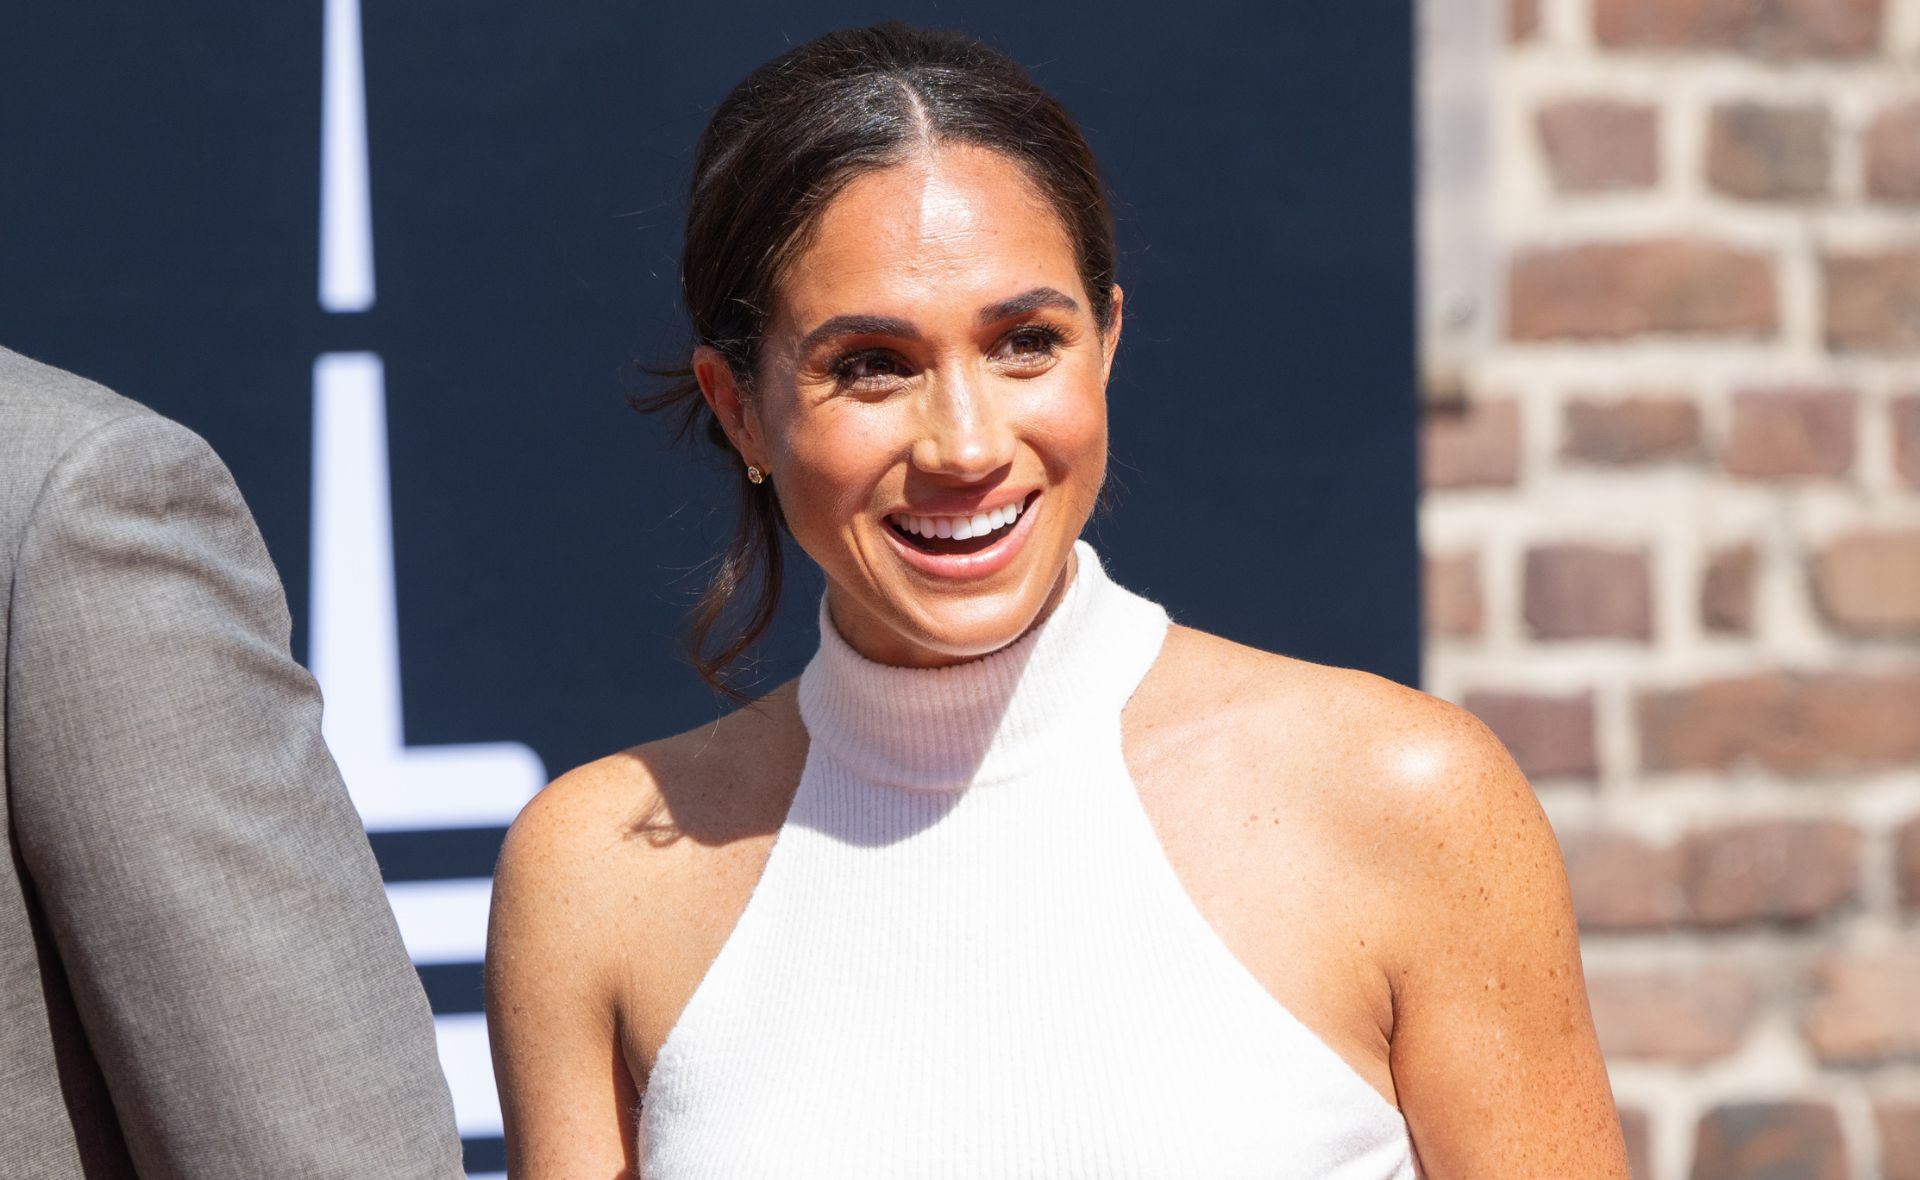 Meghan Markle sets the record straight about the origin of her son Archie’s unique name